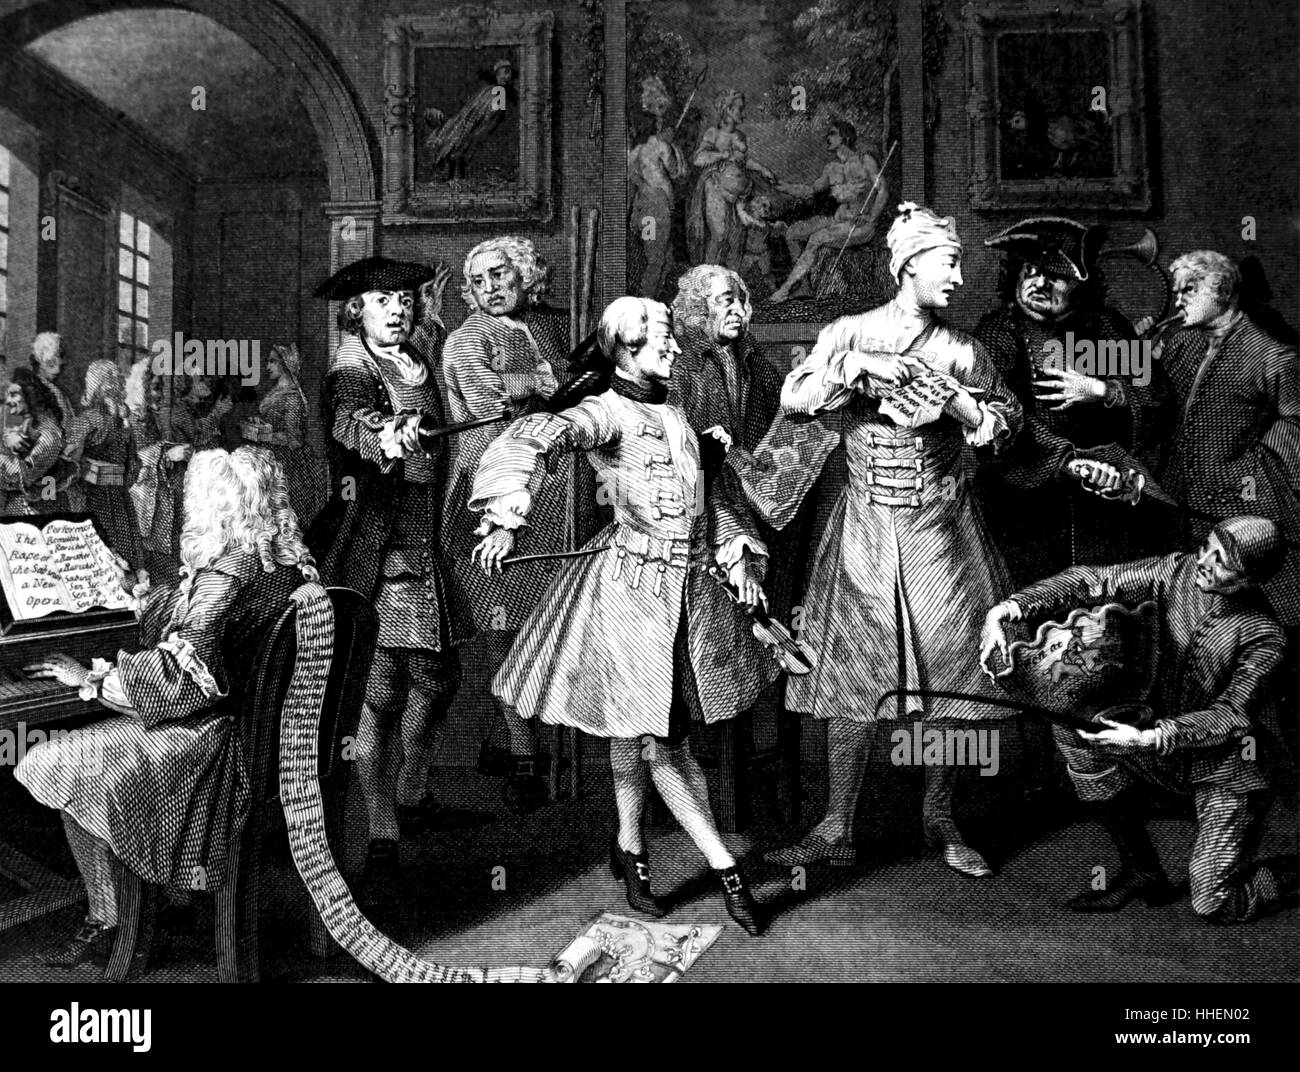 Engraving titled 'The Rake's Progress' by William Hogarth (1697-1764) showing the Rake launched in the fashionable world with all the social parasites around him ready to spend all his money. Dated 18th Century Stock Photo